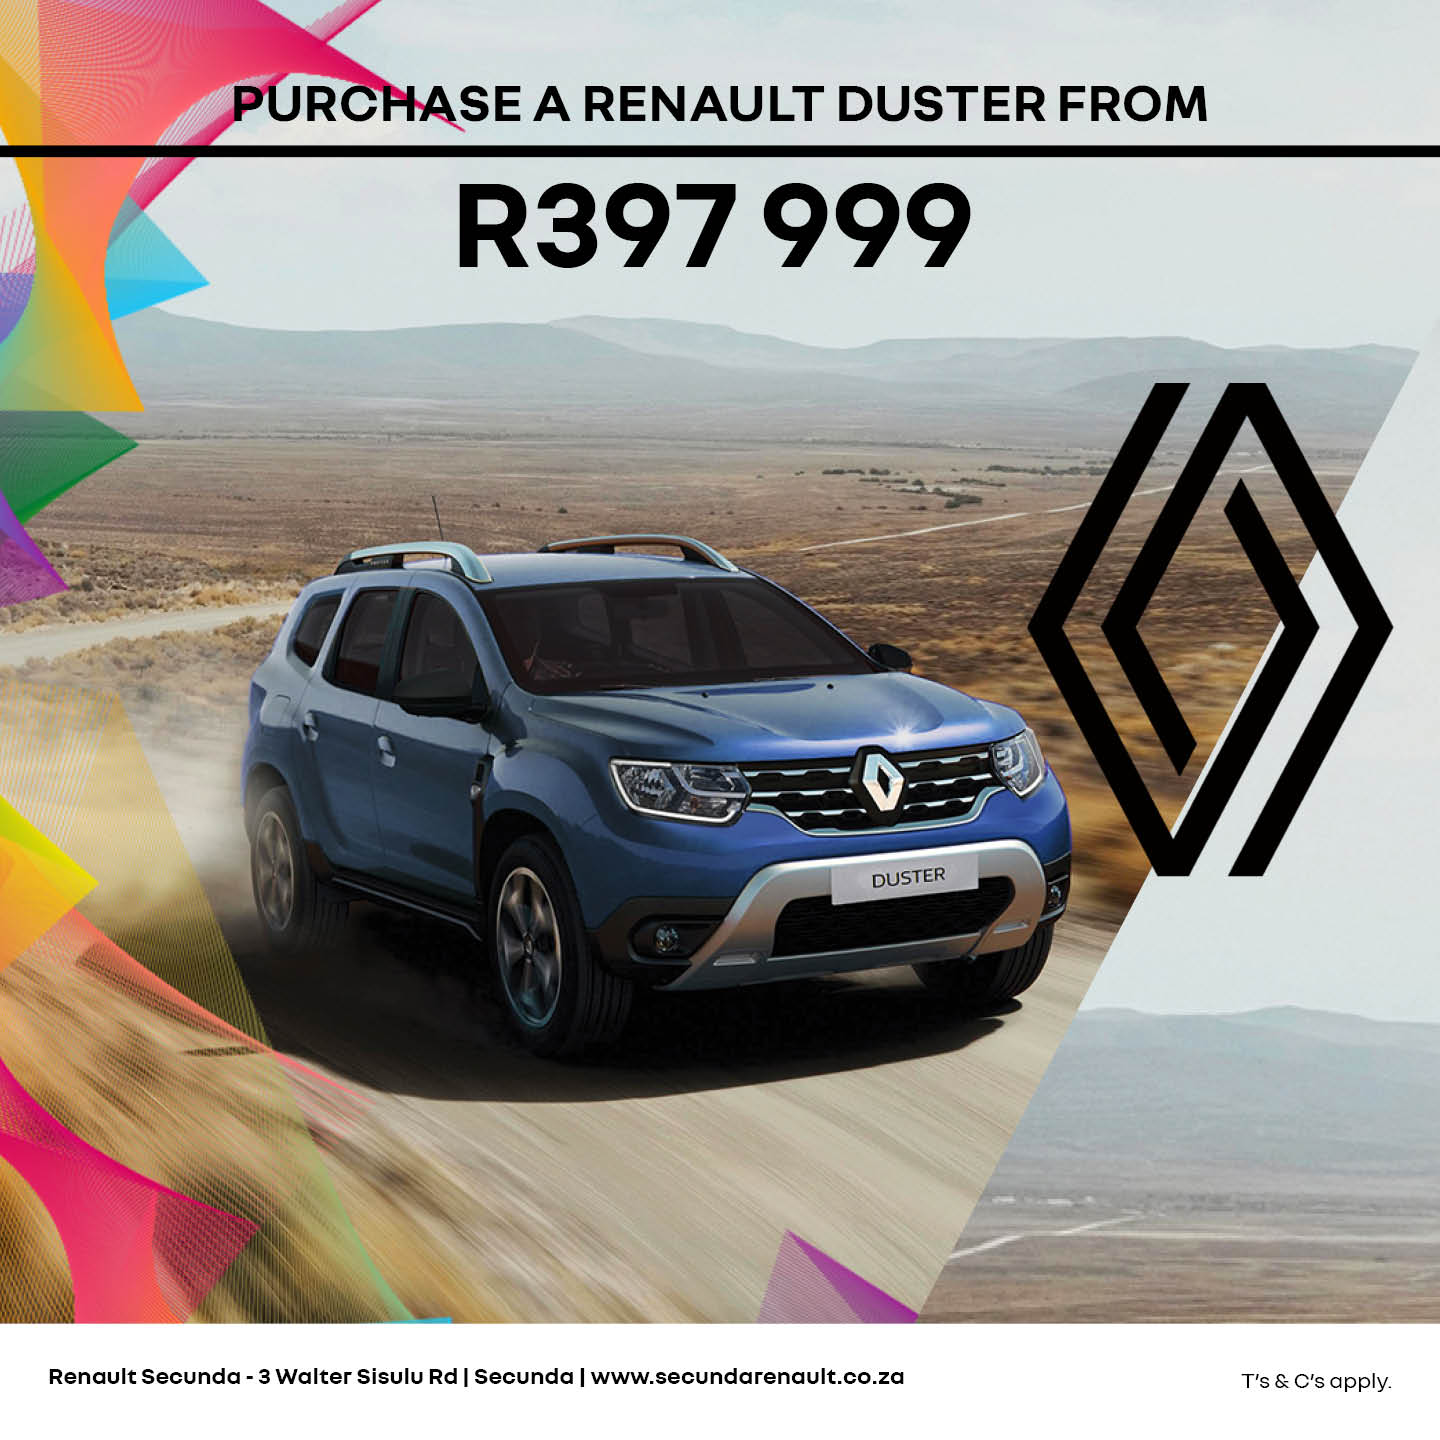 Dust through the road with the Renault Duster! image from 